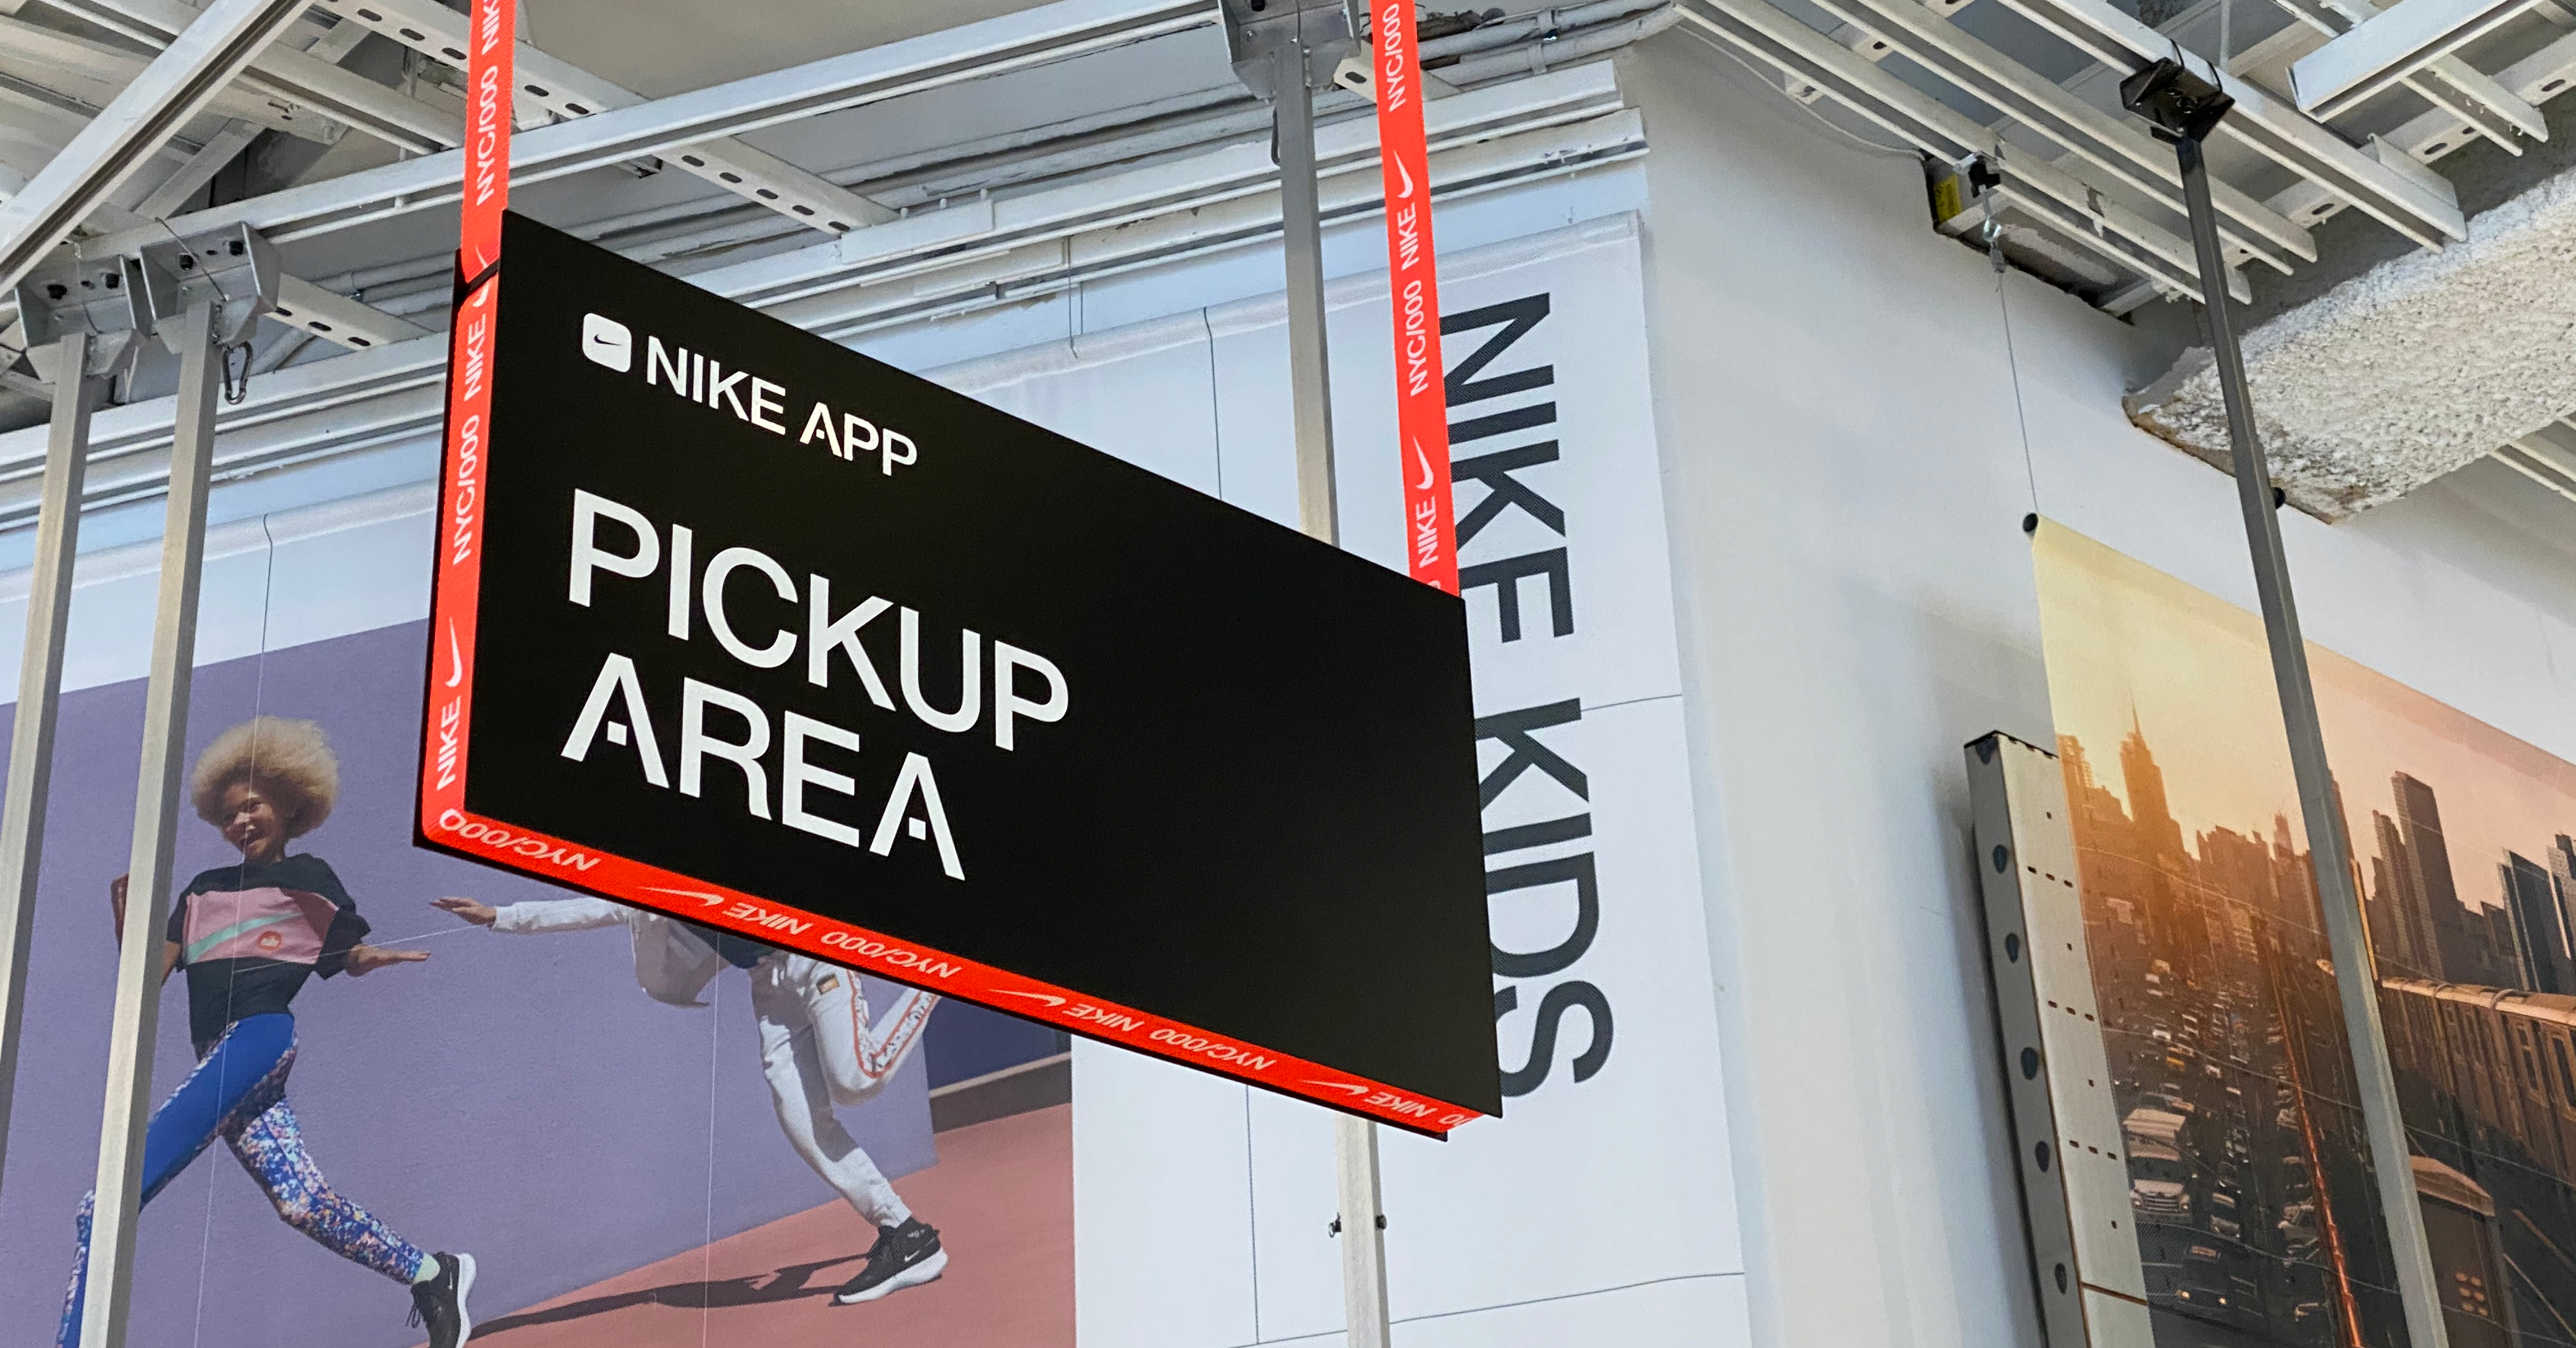 4 Reasons Why Retail Brands Offer Buy Online Pick-Up In Store Options